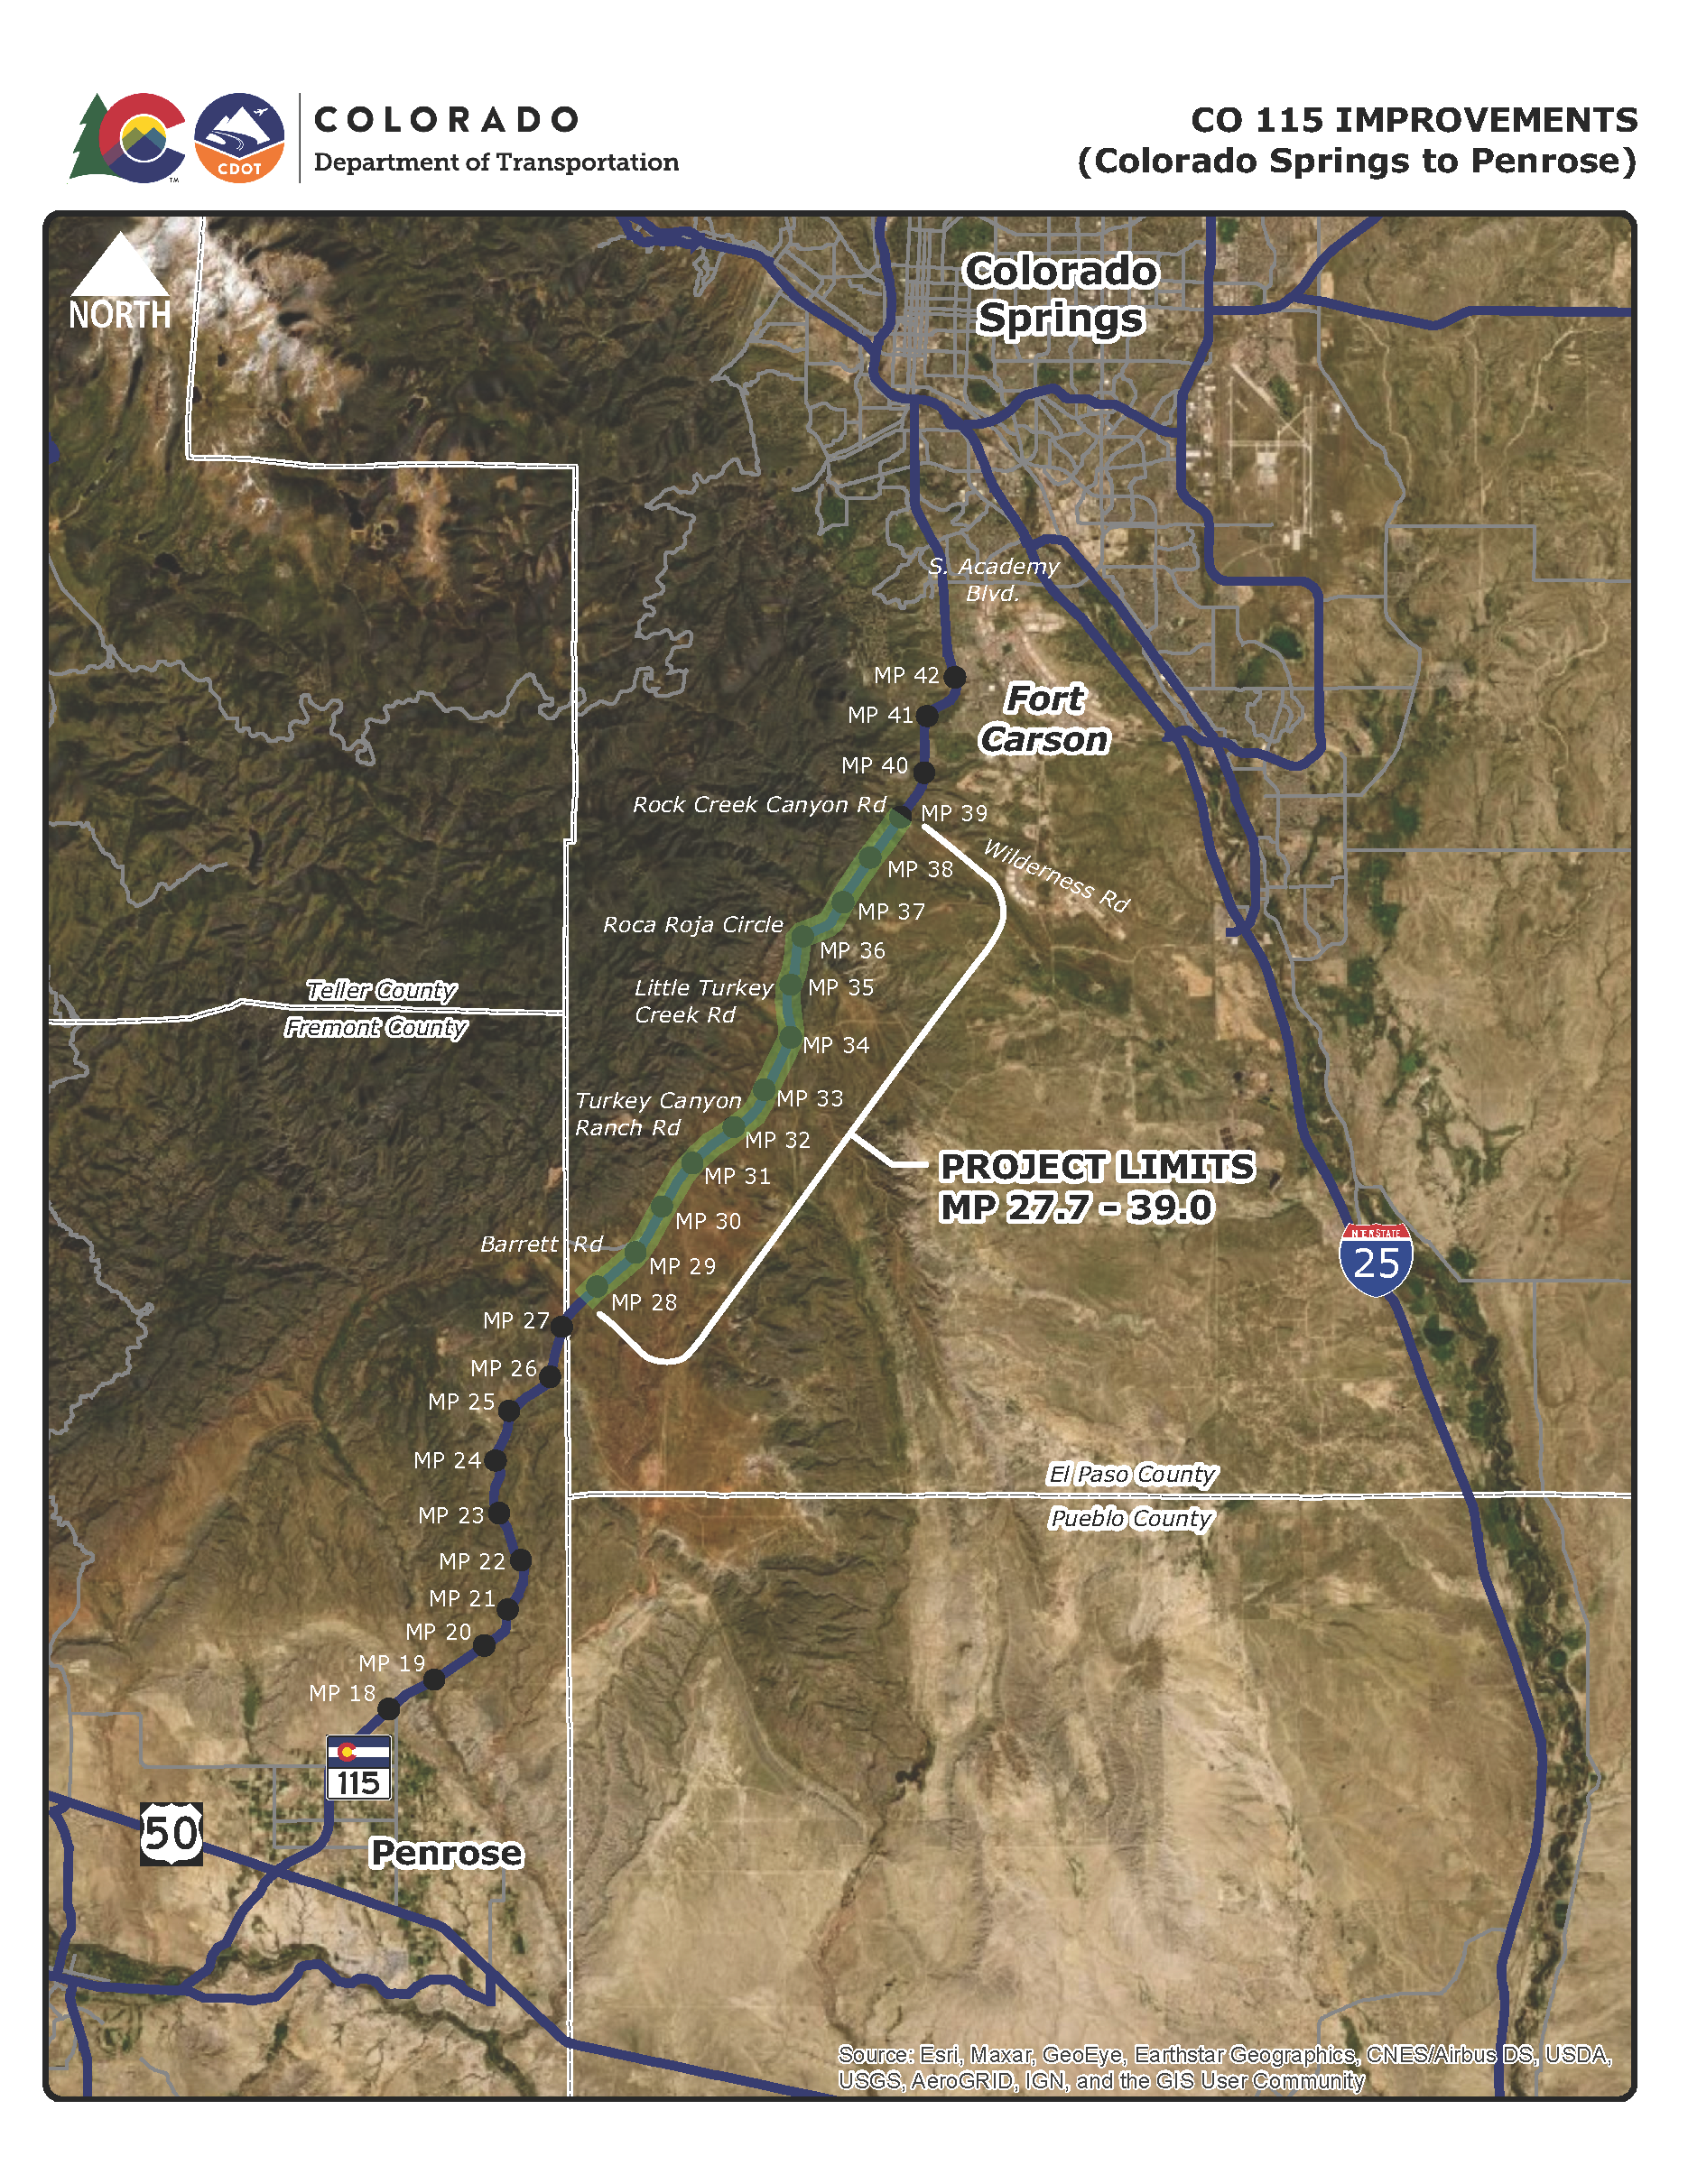 CO115 Improvements Project Map_v2.png detail image